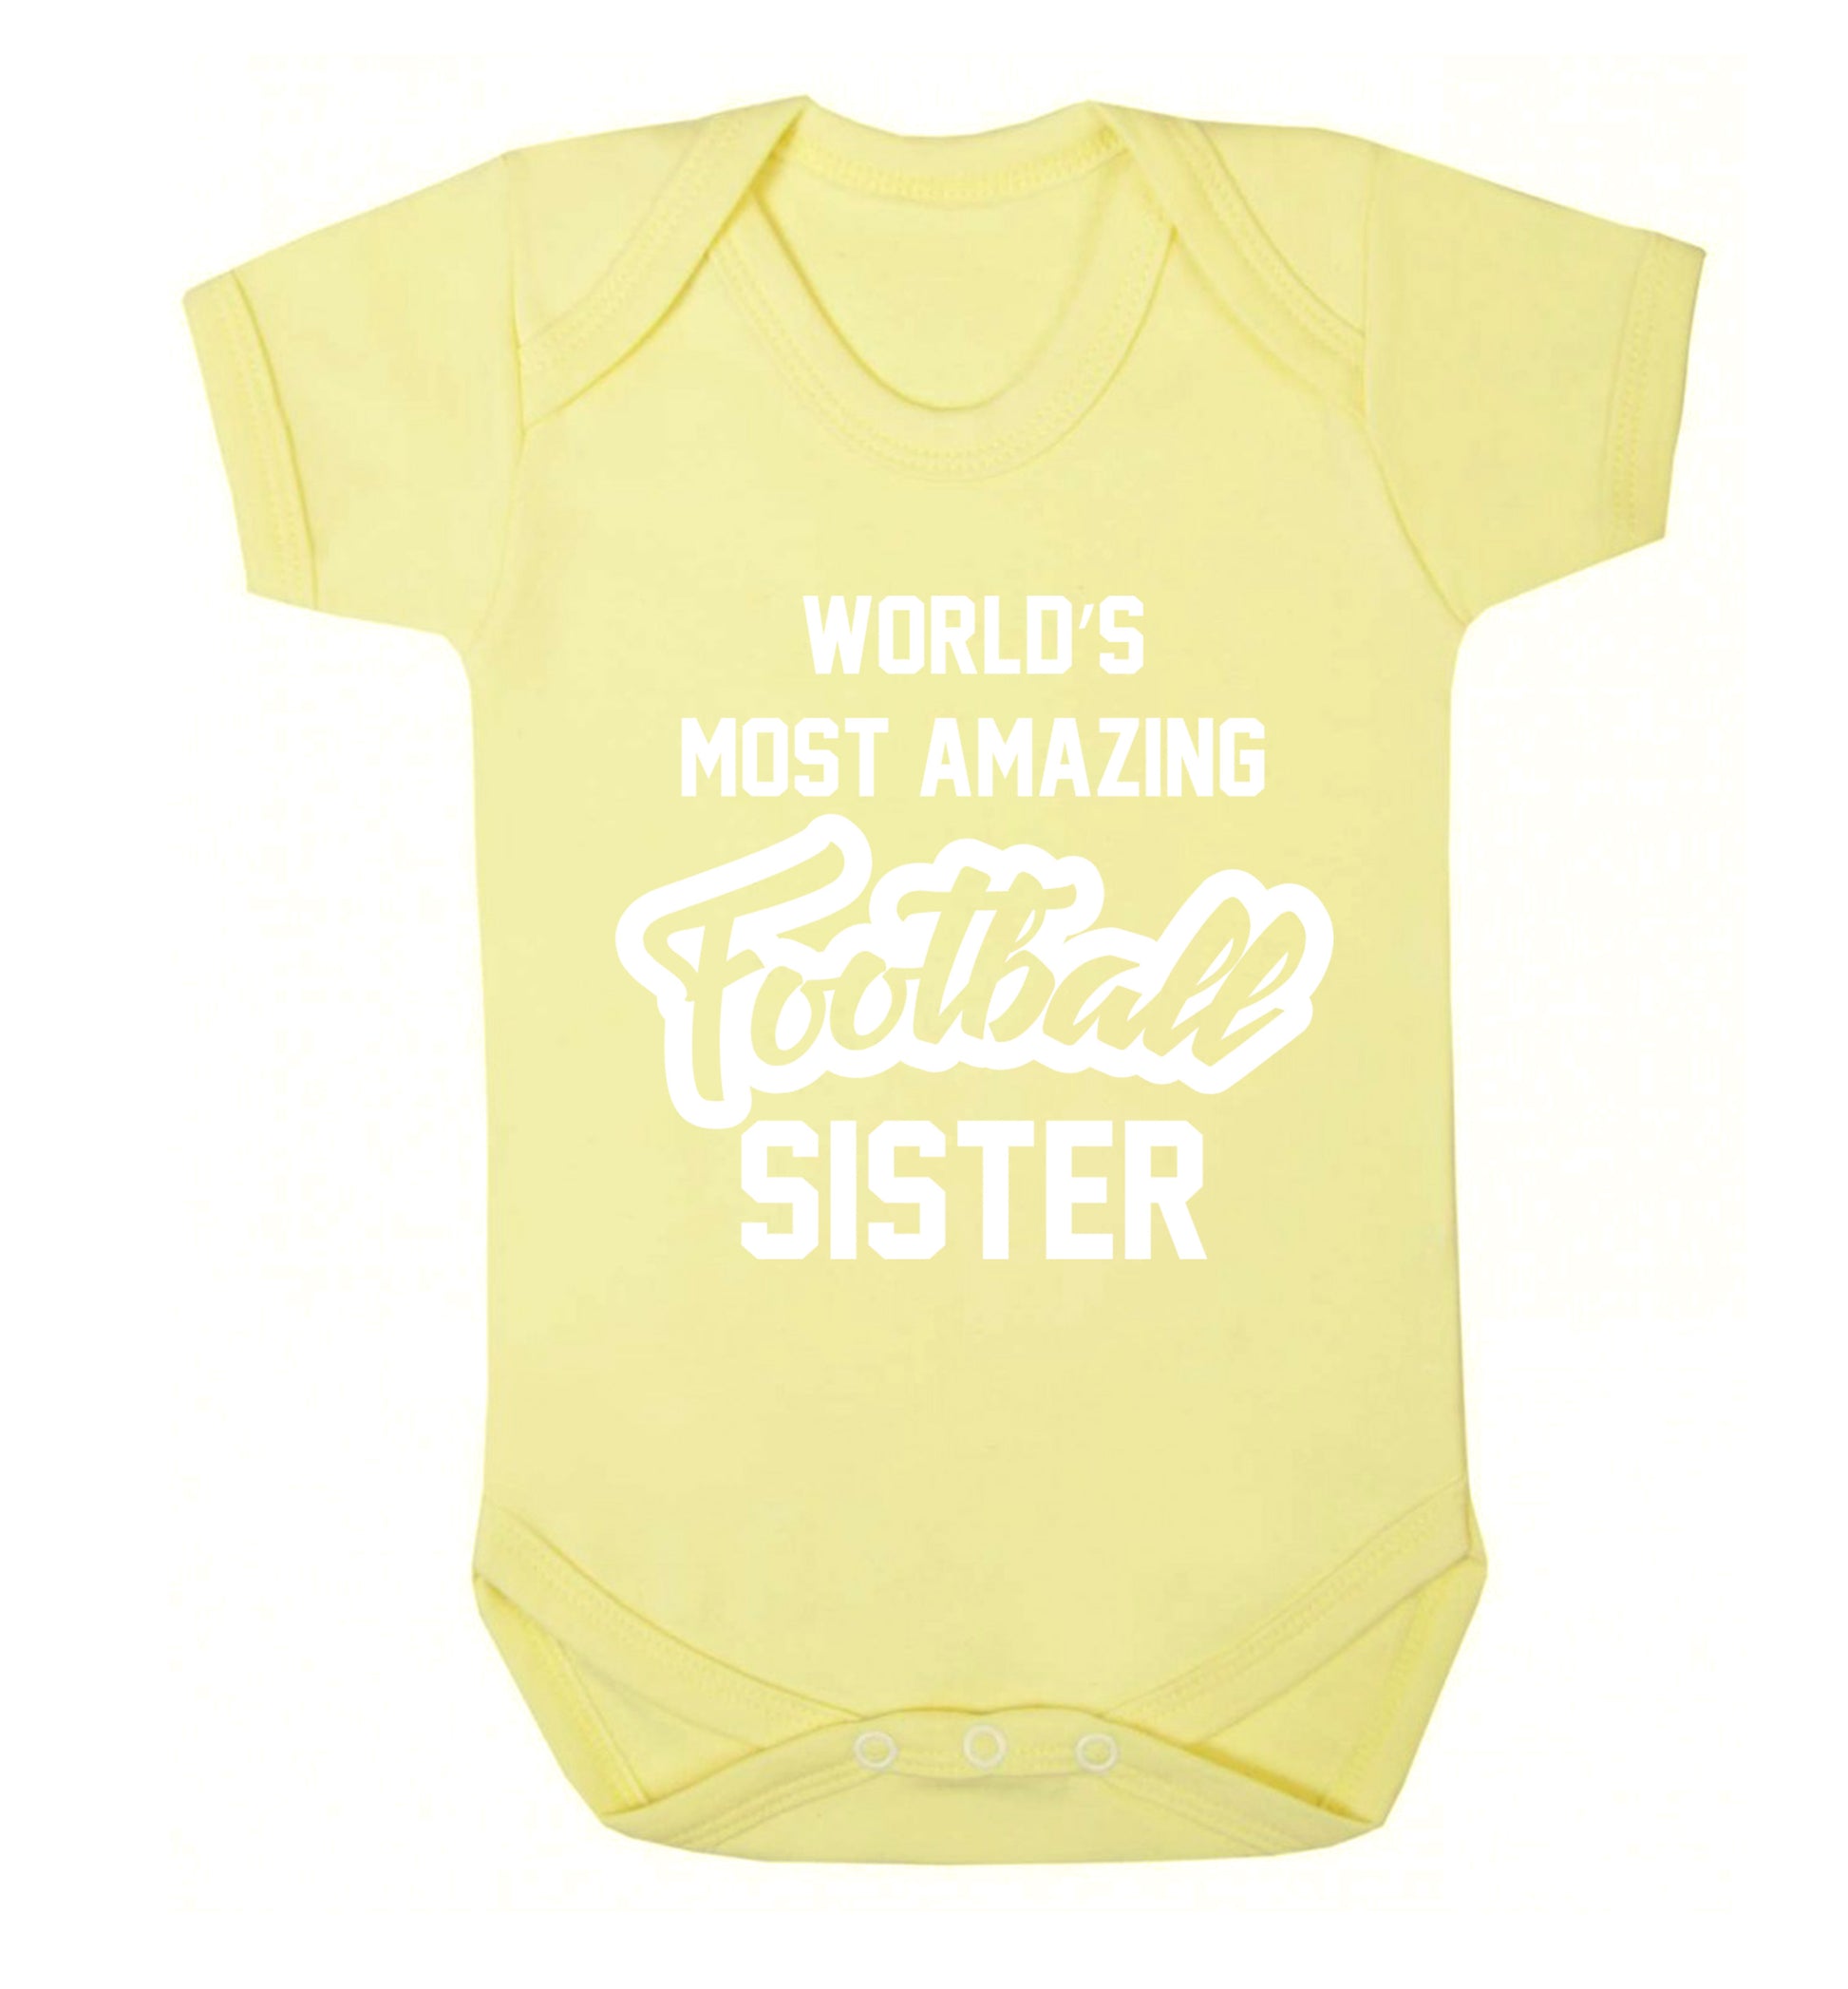 Worlds most amazing football sister Baby Vest pale yellow 18-24 months